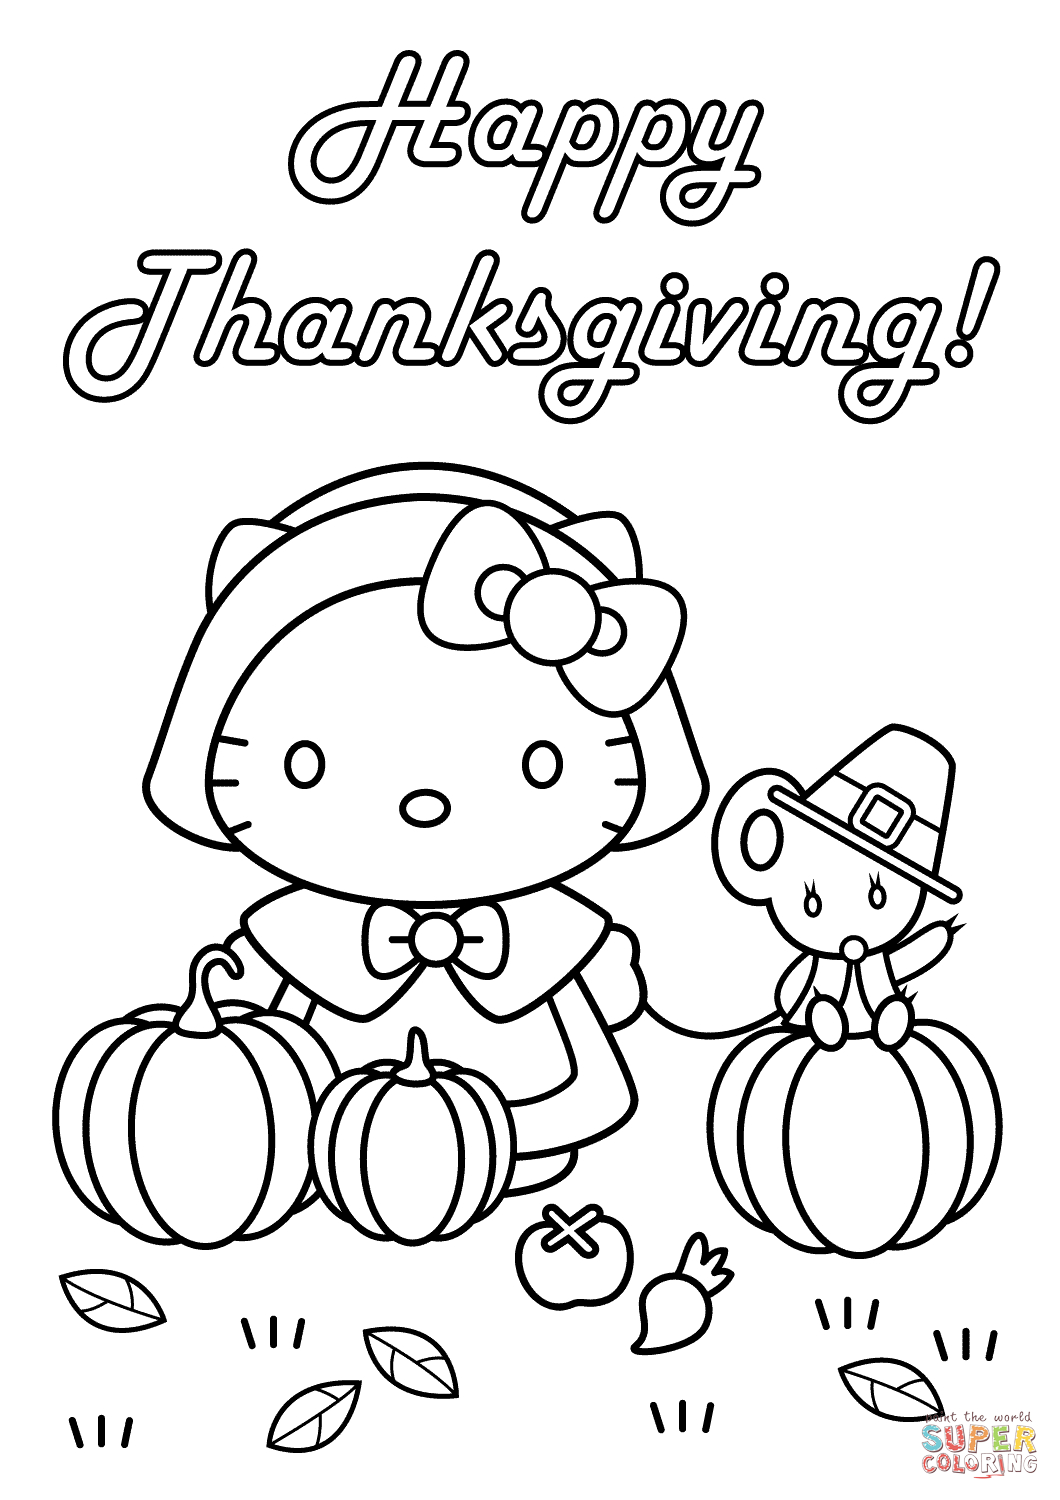 Hello Kitty Happy Thanksgiving Coloring Page | Free Printable - Free Printable Thanksgiving Coloring Pages